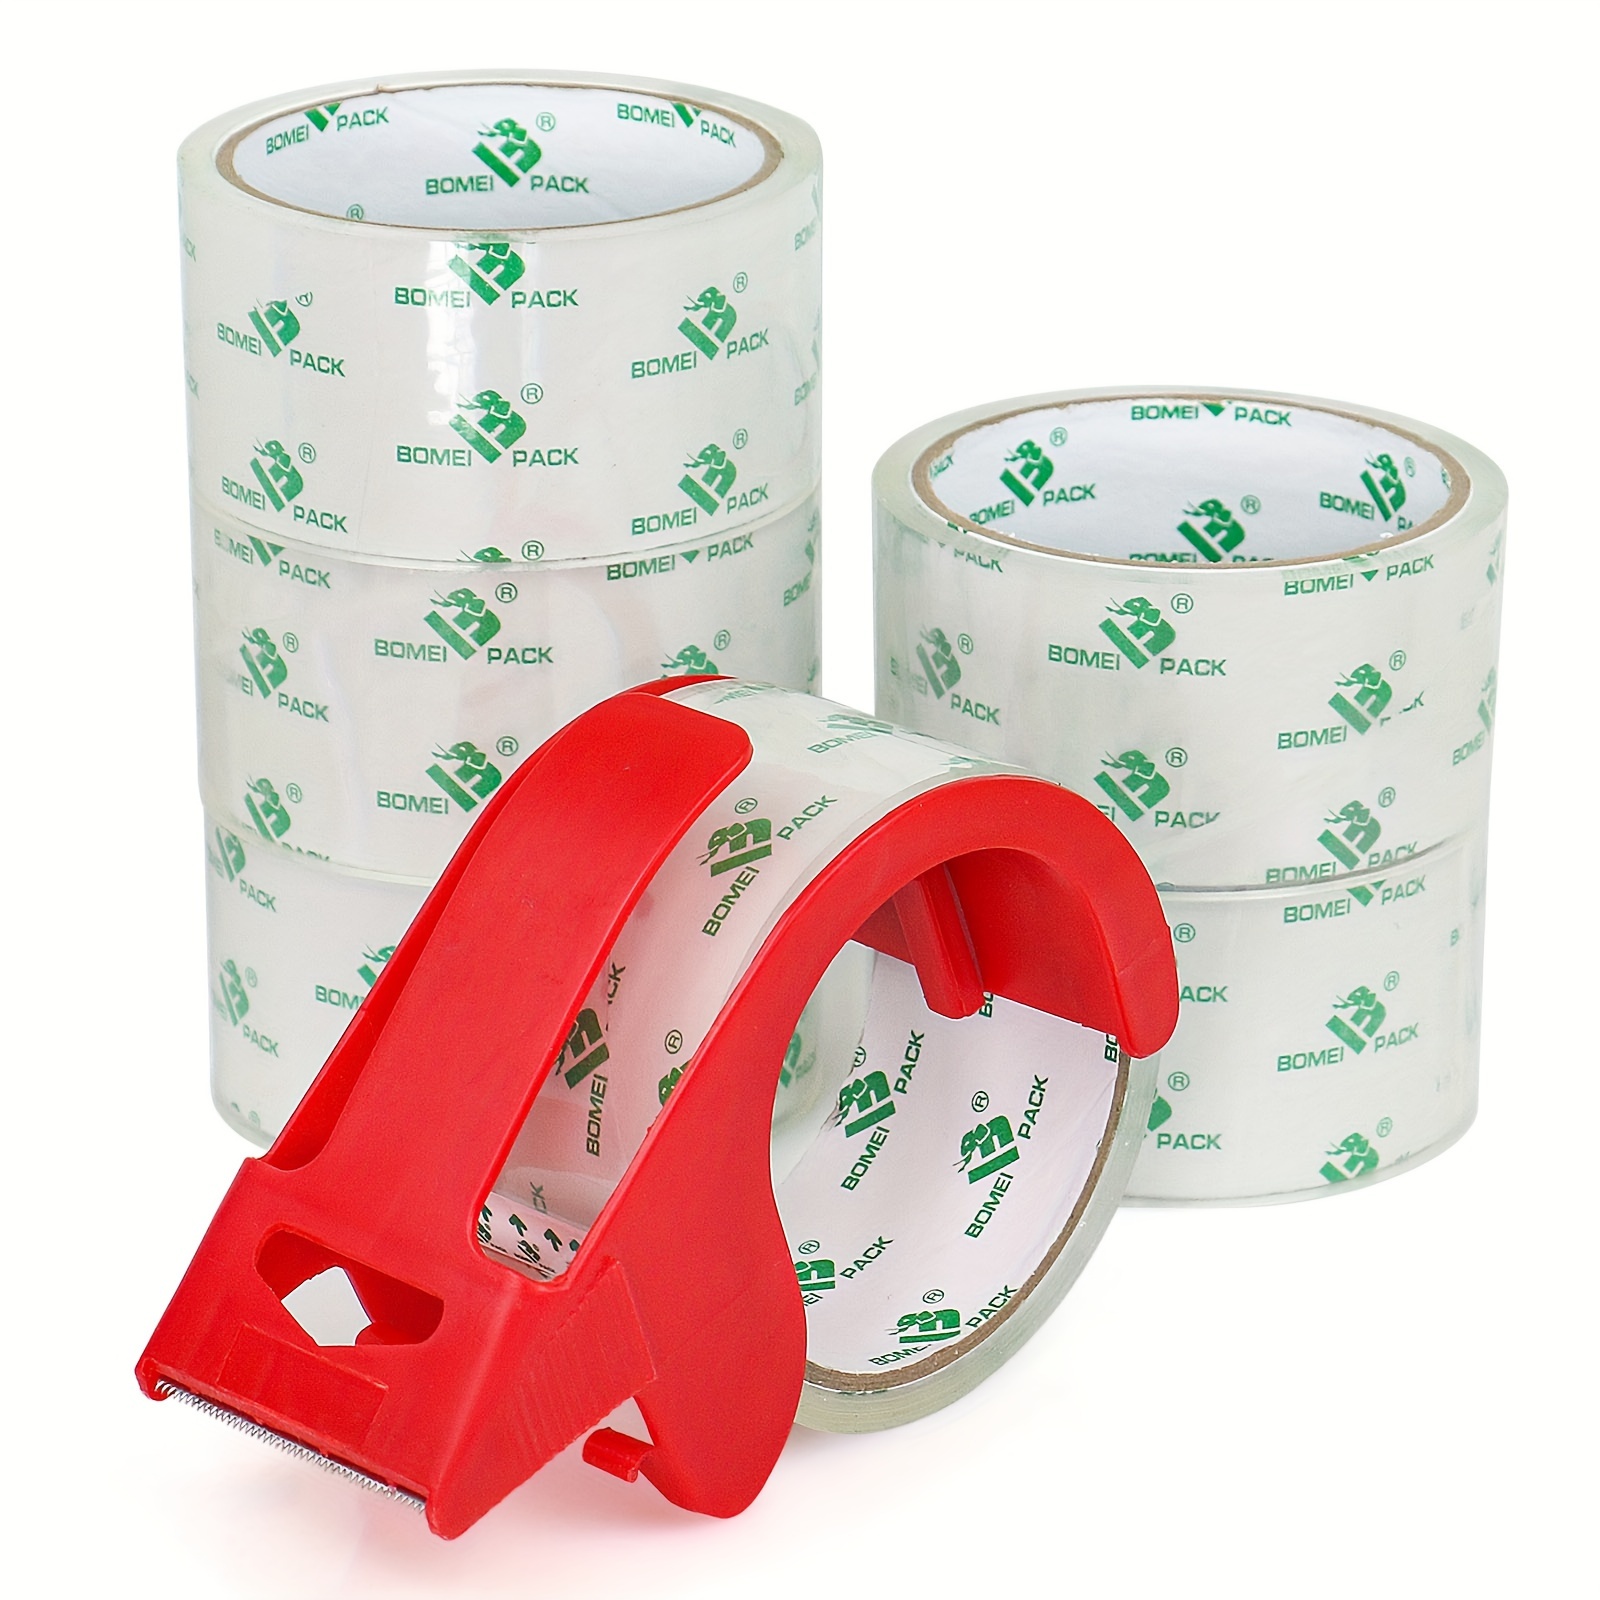 Double Sided Tape - Large Core (45M) 1P